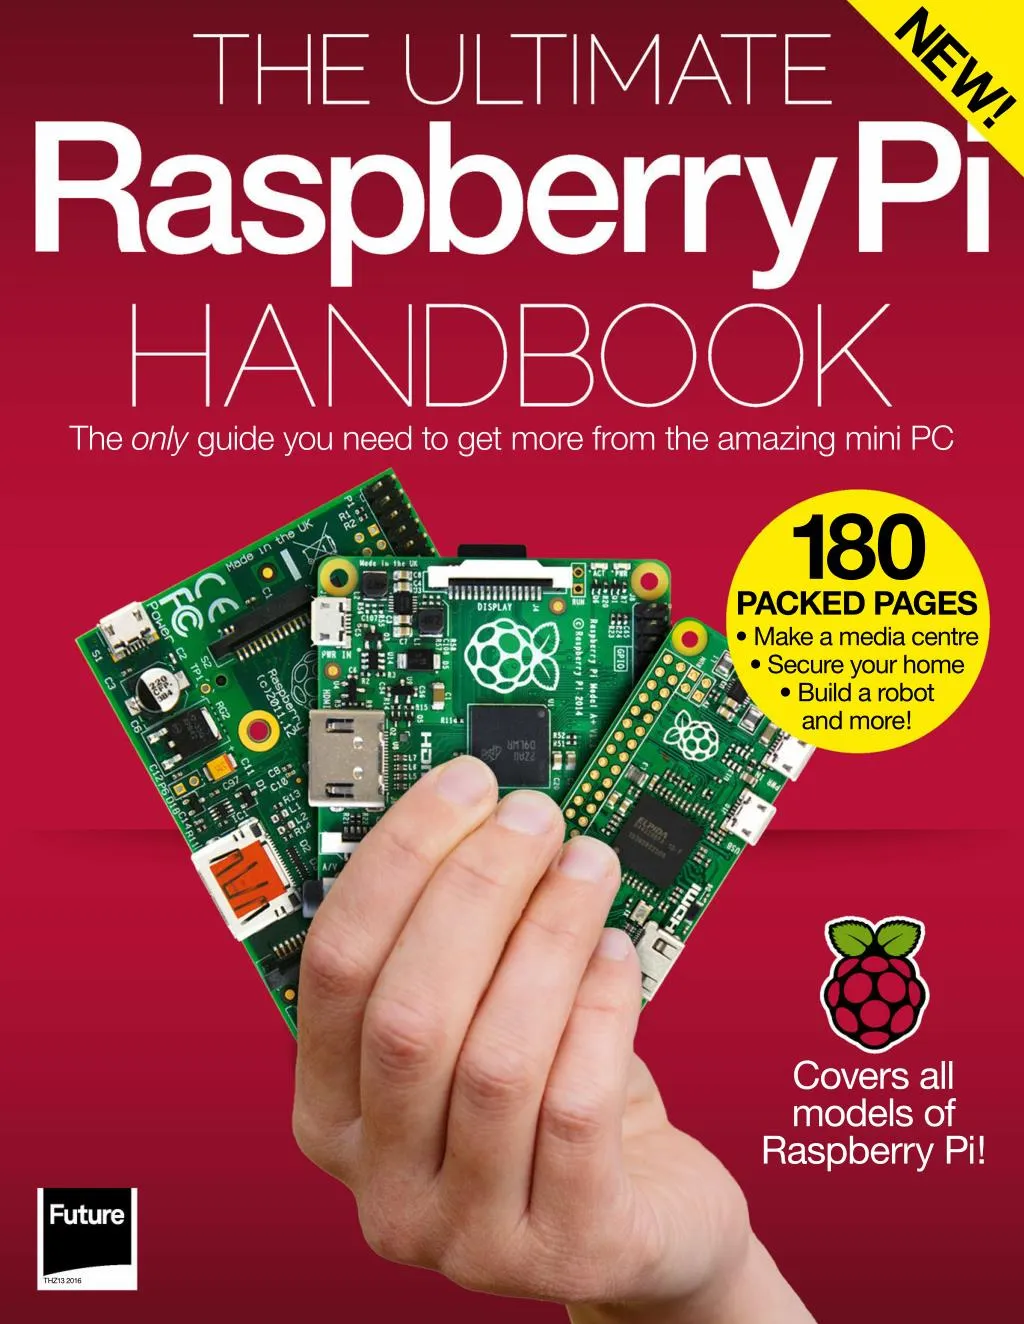 Raspberry Pi 2 Initial set-up and configuration with NOOBS / Raspbian – 42  Bots